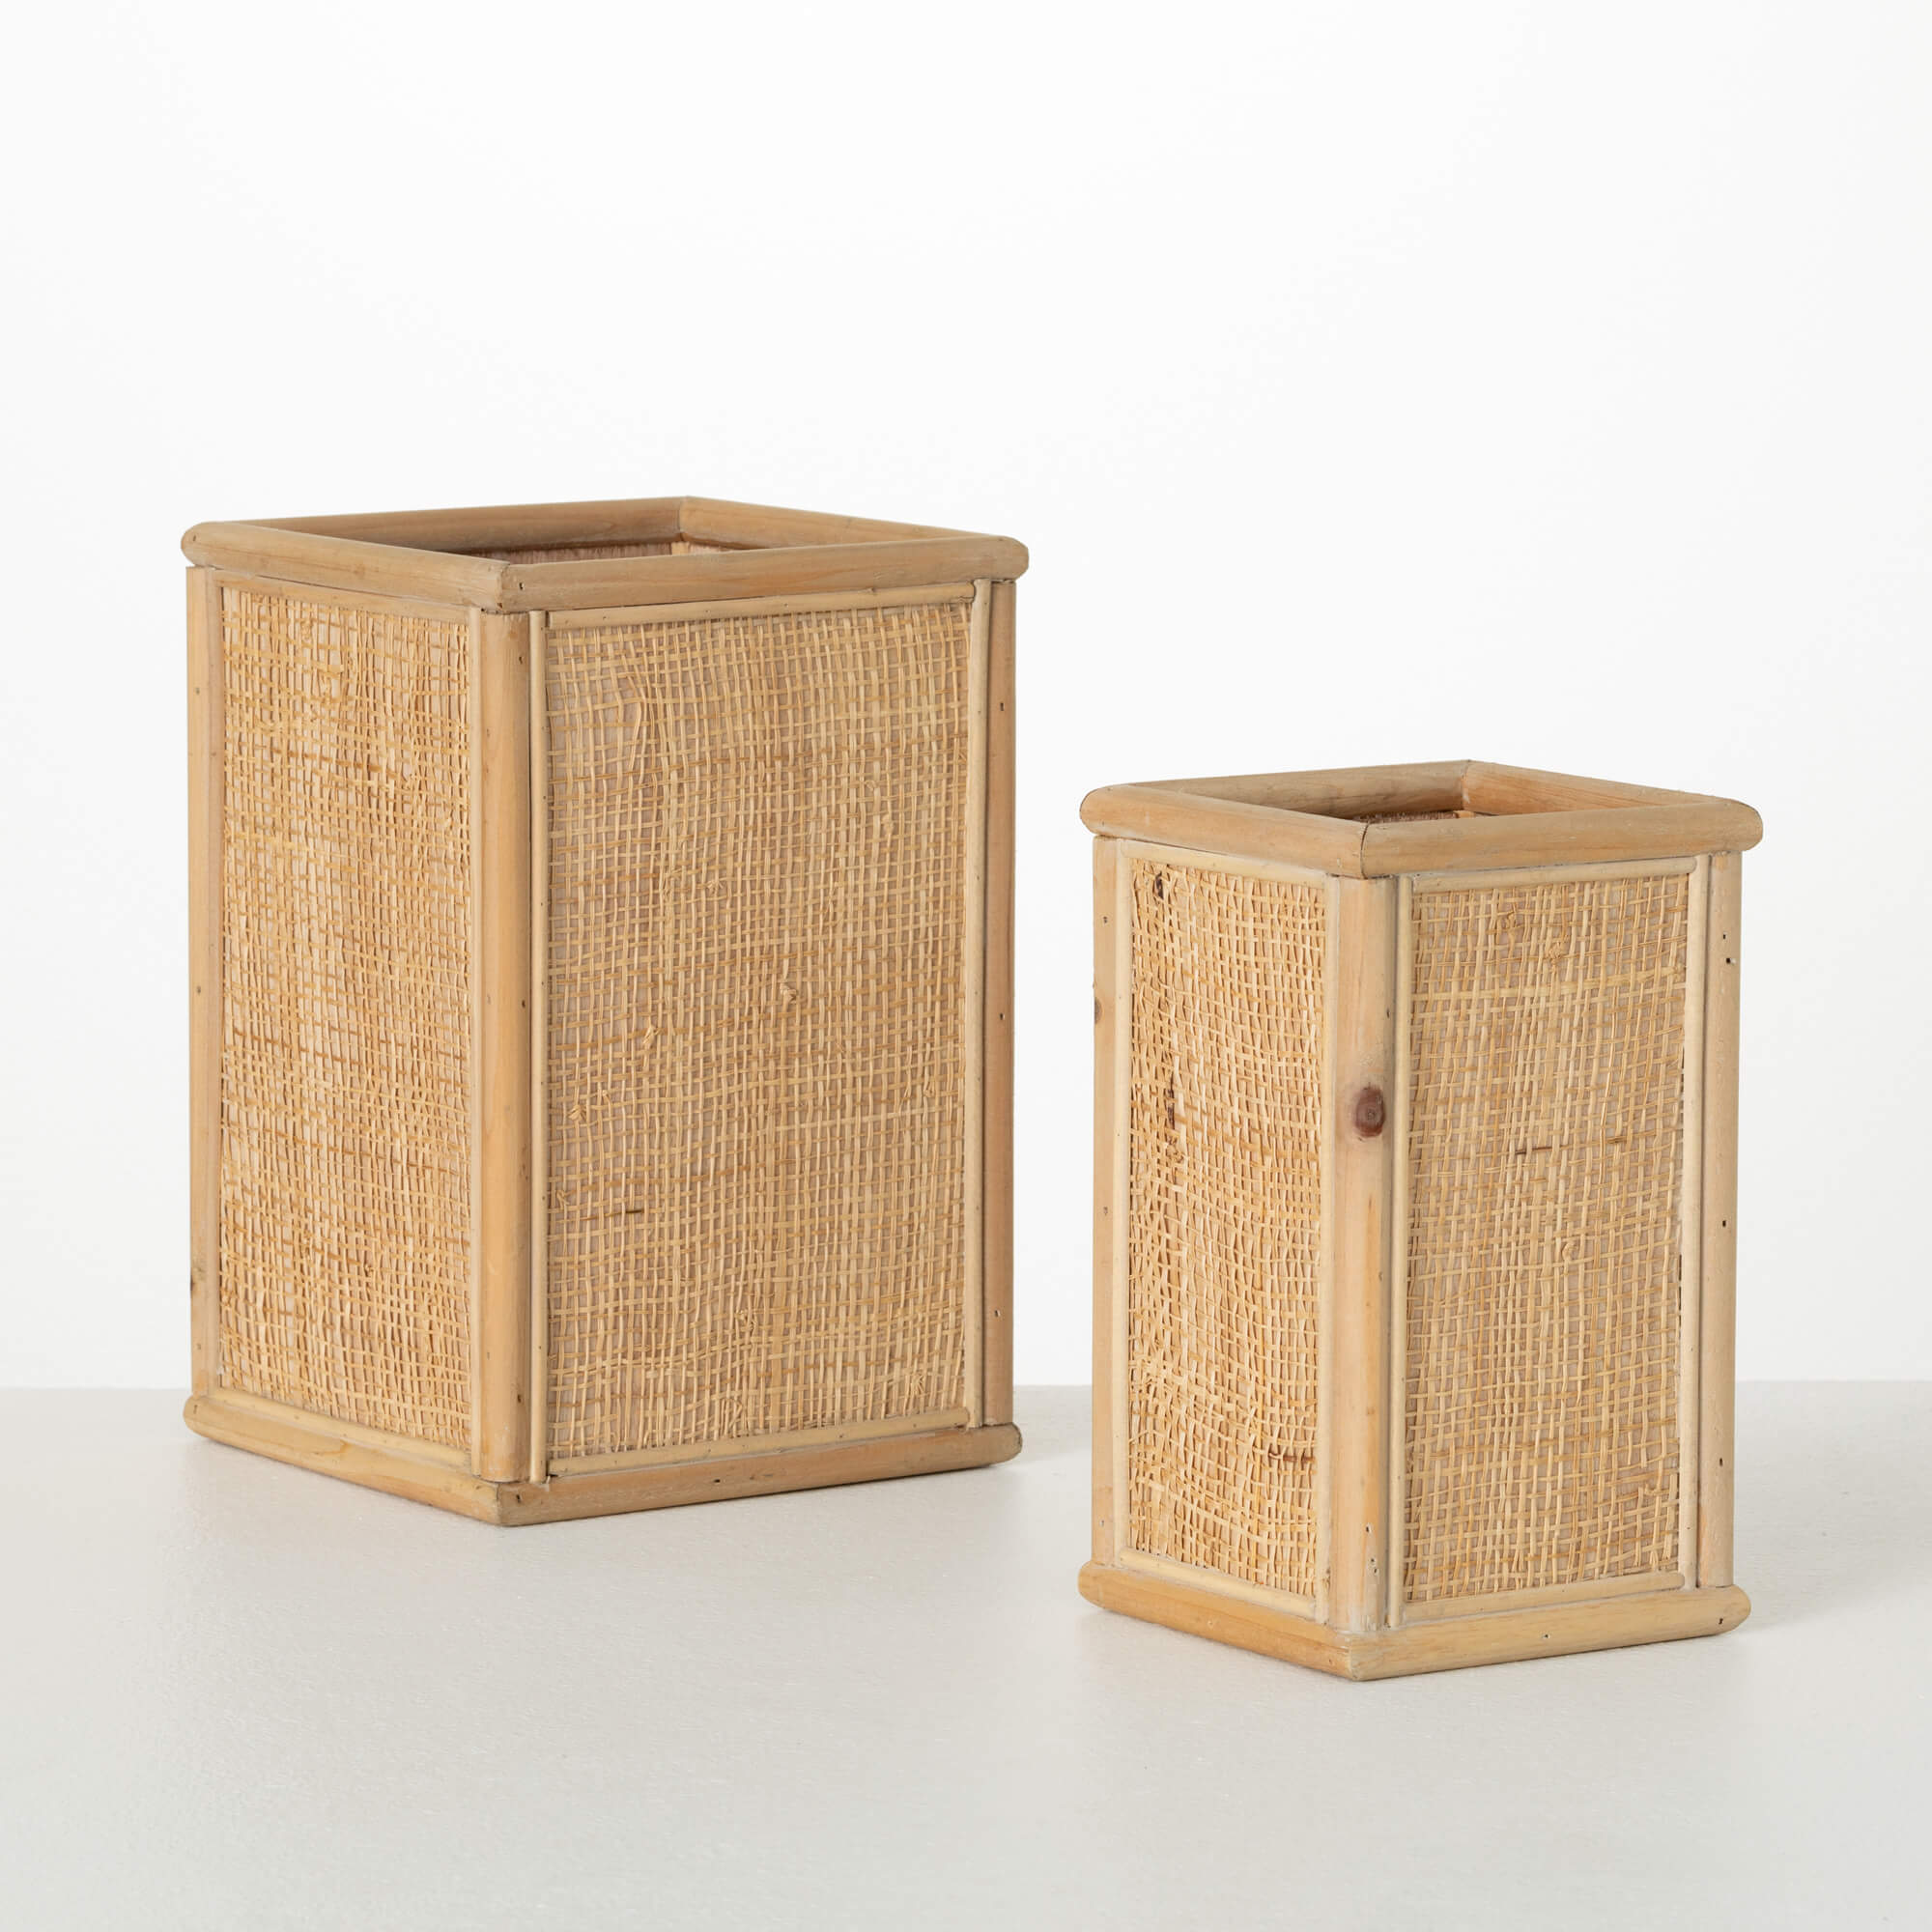 WOOD & SEAGRASS CONTAINER SET